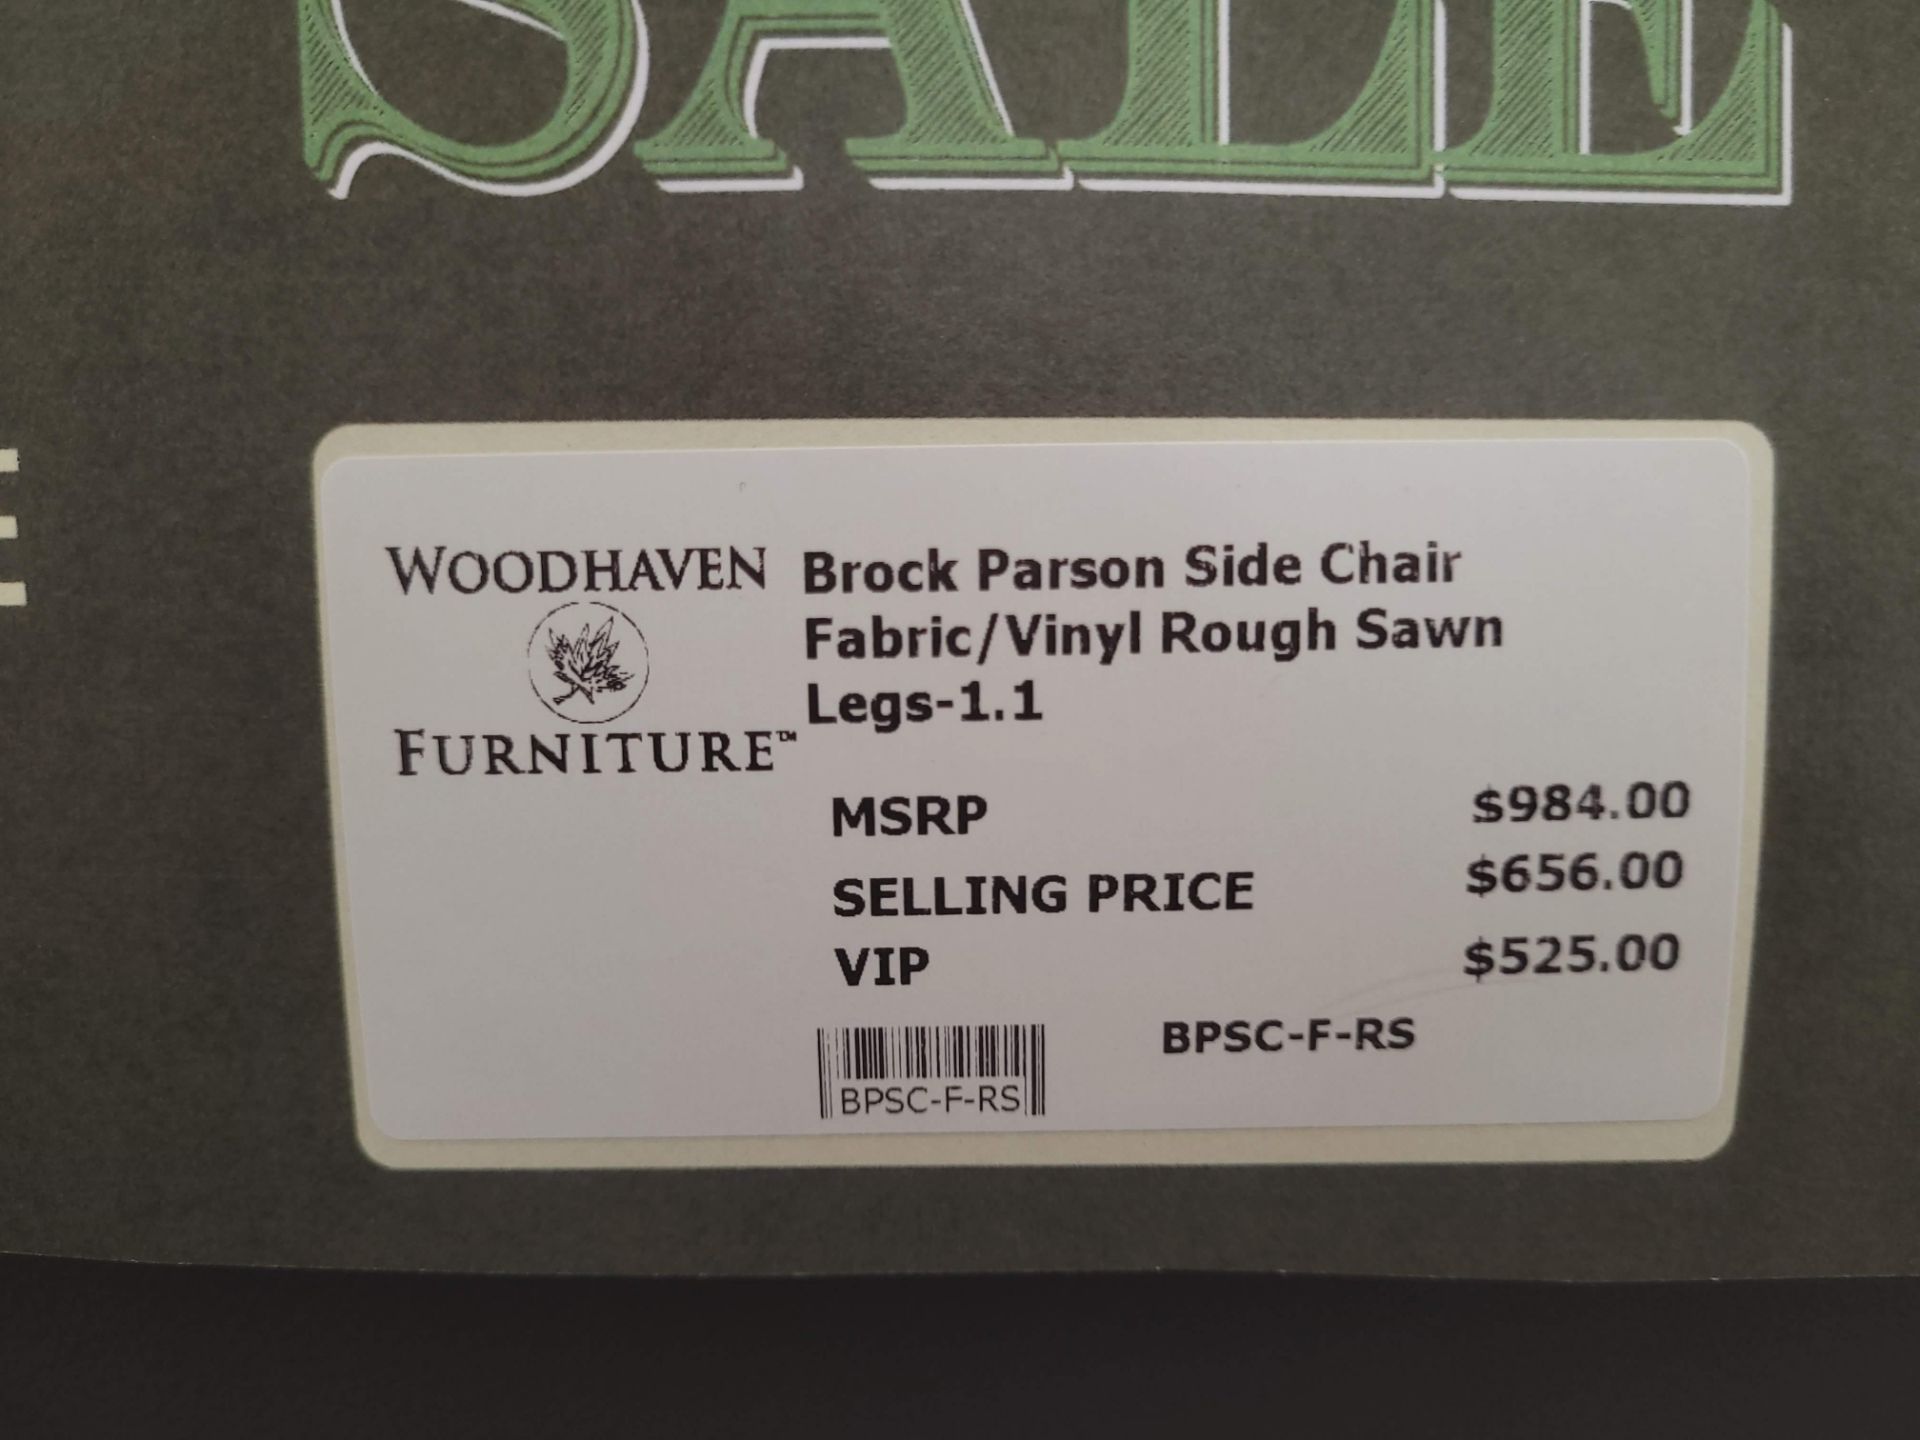 BROCK PARSON SIDE CHAIR W/ VINY; ROUGH SAWN LEGS - MSRP $984.00 - Image 4 of 4